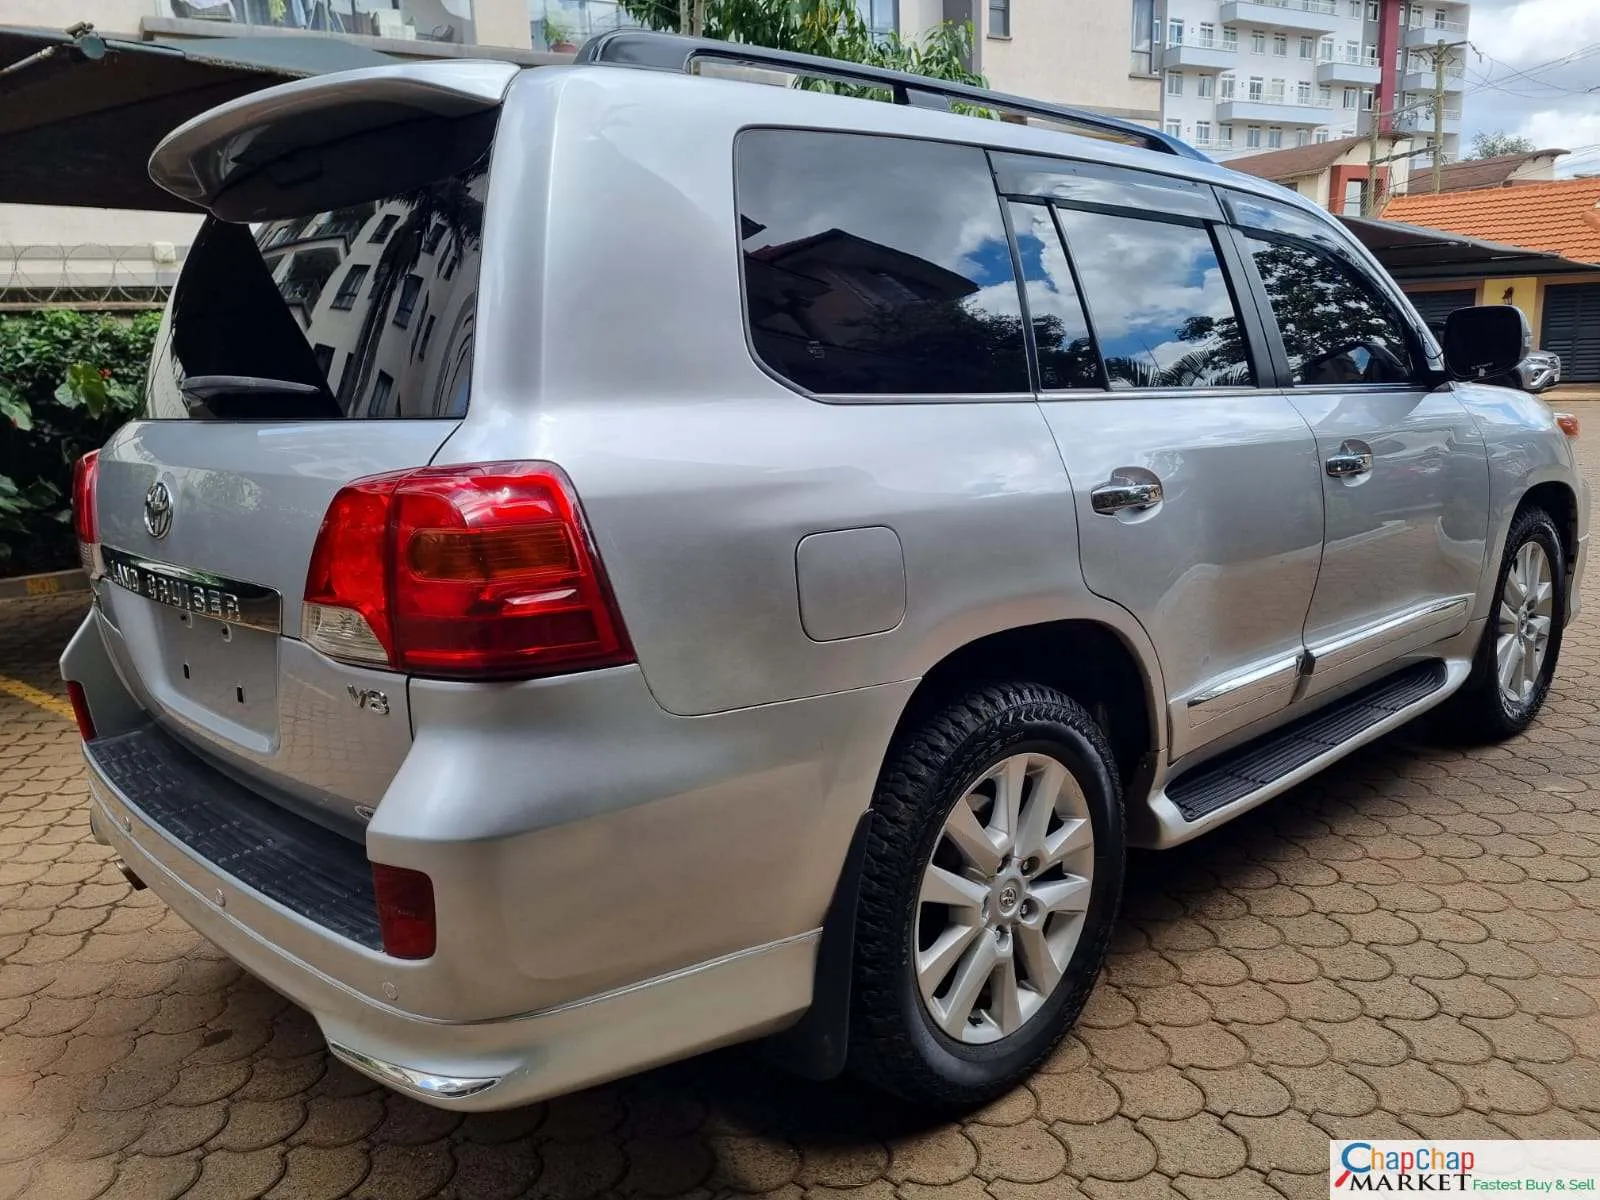 Cars Cars For Sale/Vehicles-Toyota Landcruiser ZX V8 200 SERIES SUNROOF QUICK SALE Triple number You Pay 40% Deposit Trade in Ok 8